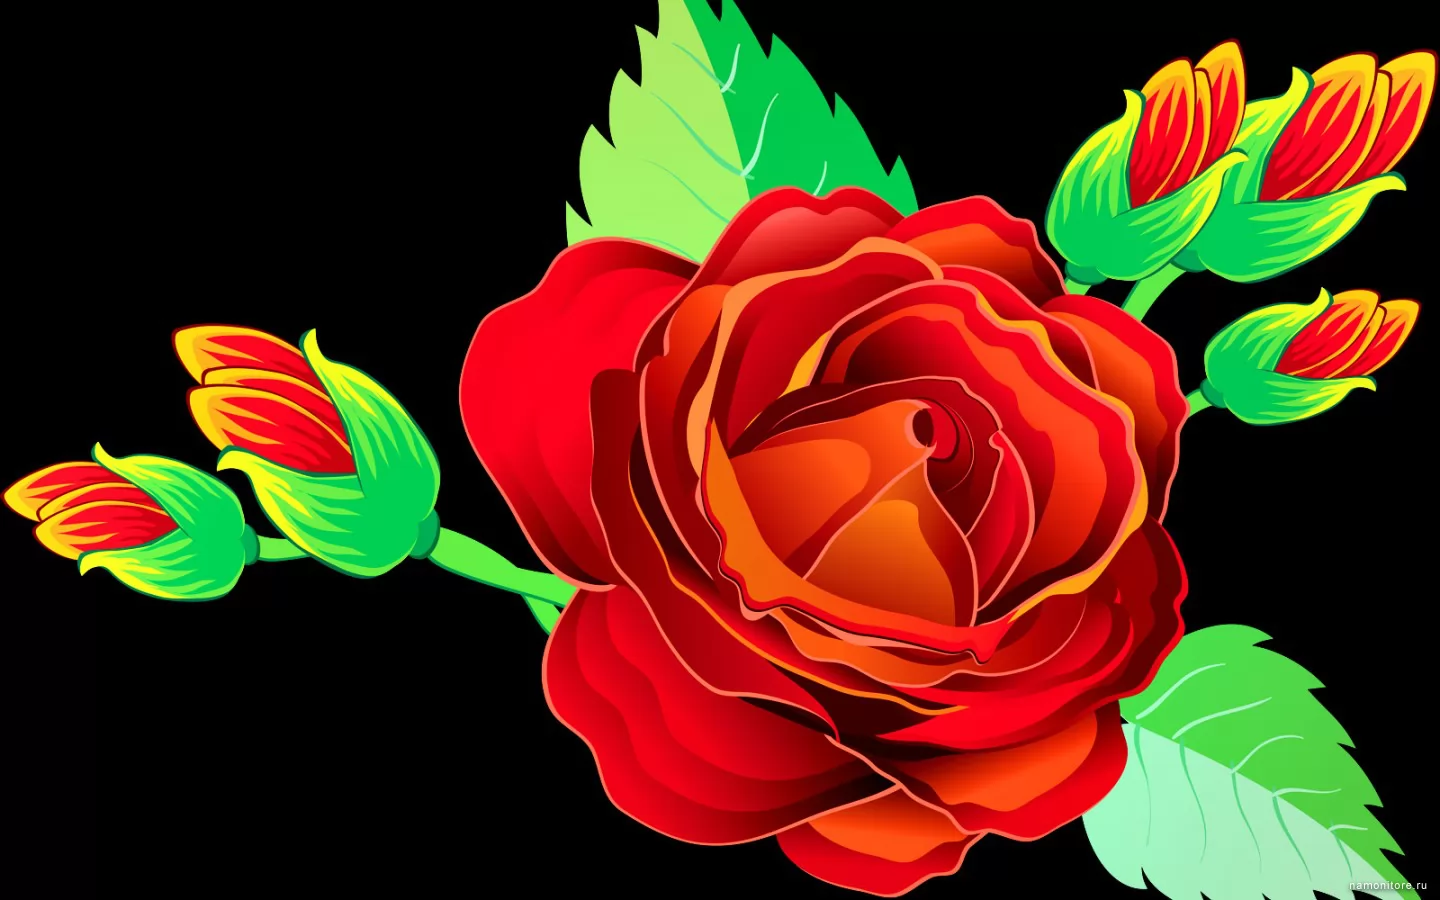 Rose, black, drawed, flowers, red, roses x